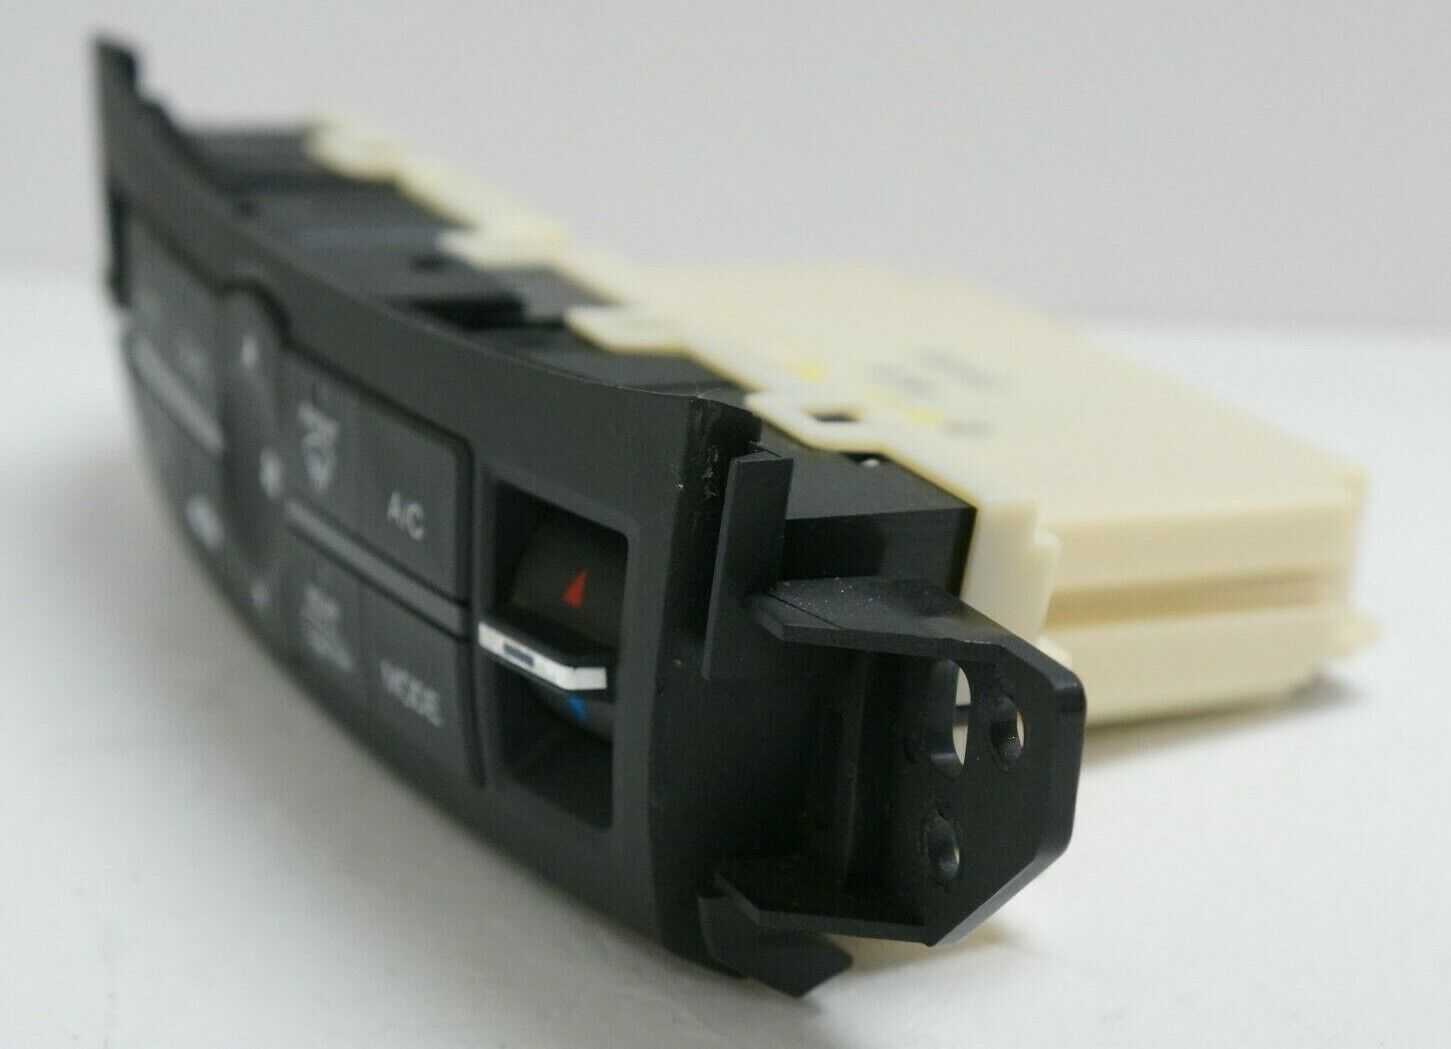 2009-2010 Acura TSX Heater AC Climate Control Unit OEM 79600-TL2-A01 Alshned Auto Parts